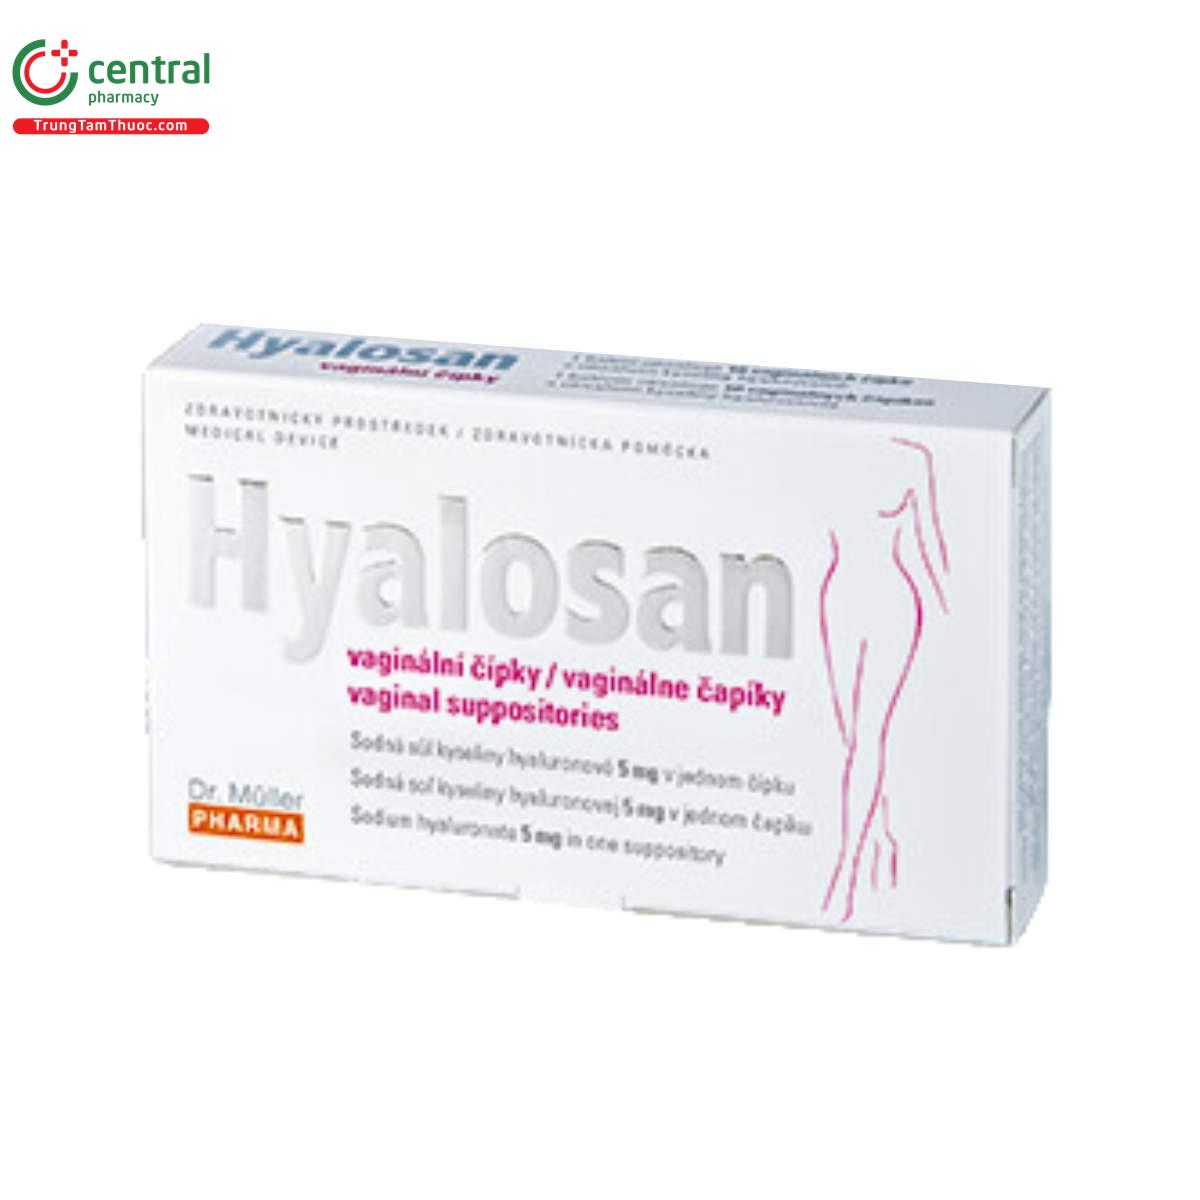 hyalosan vaginal supporities 4 T7150